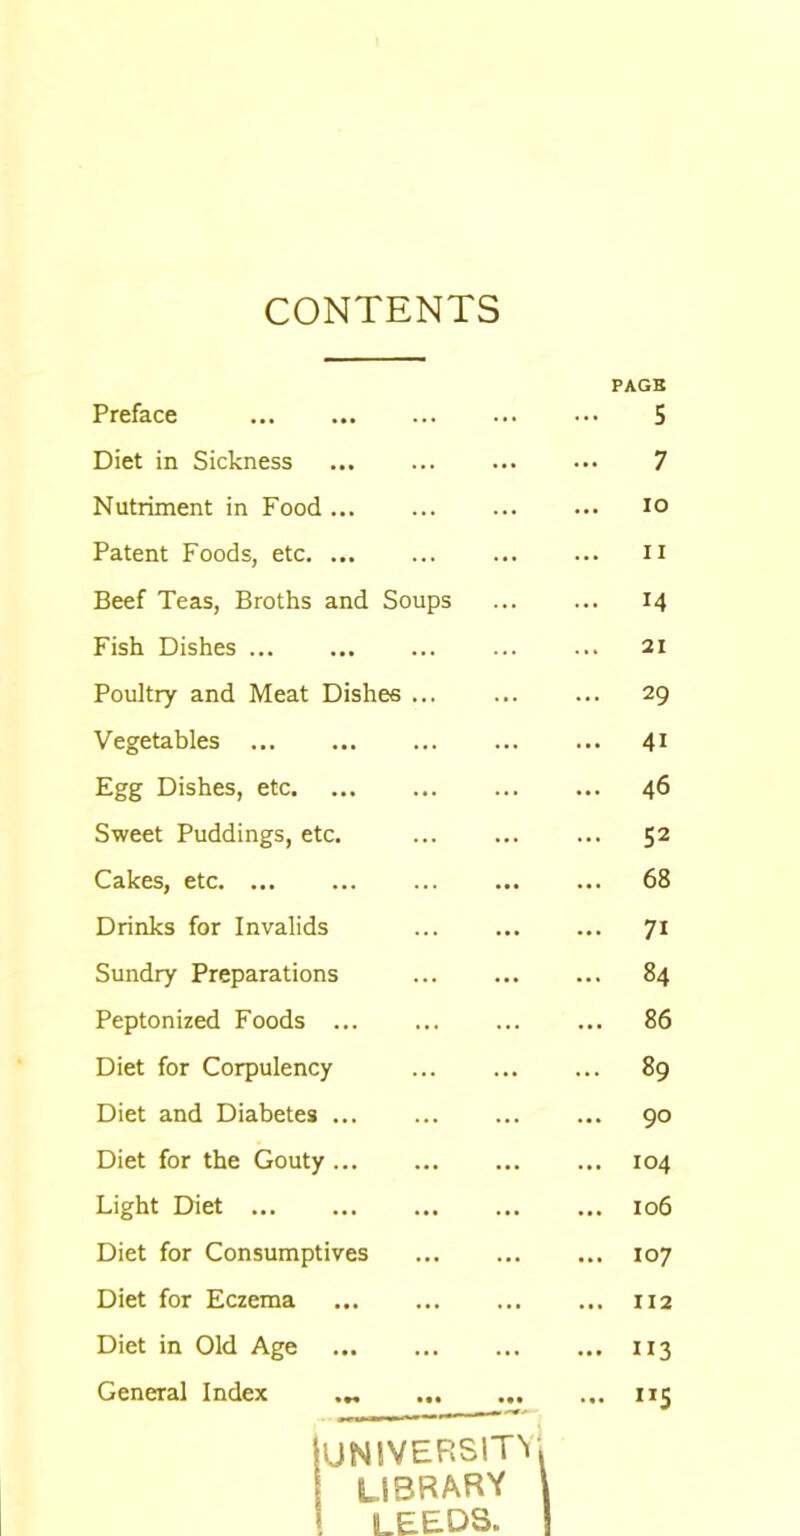 CONTENTS PAGE Preface • • • ••• ••• ... 5 Diet in Sickness ••• ••• ••• 7 Nutriment in Food IO Patent Foods, etc. ... 11 Beef Teas, Broths and Soups M Fish Dishes ... ... ... 21 Poultry and Meat Dishes ... 29 Vegetables ... 4i Egg Dishes, etc. 46 Sweet Puddings, etc. ... 52 Cakes, etc. ... ... 68 Drinks for Invalids 7i Sundry Preparations 84 Peptonized Foods ... 86 Diet for Corpulency 89 Diet and Diabetes ... ... 90 Diet for the Gouty ... 104 Light Diet ... 106 Diet for Consumptives ... 107 Diet for Eczema ... ... 112 Diet in Old Age ... ... ... ... ”3 General Index •*« ... ... UNIVERSITY! library \ LEEDS. n5